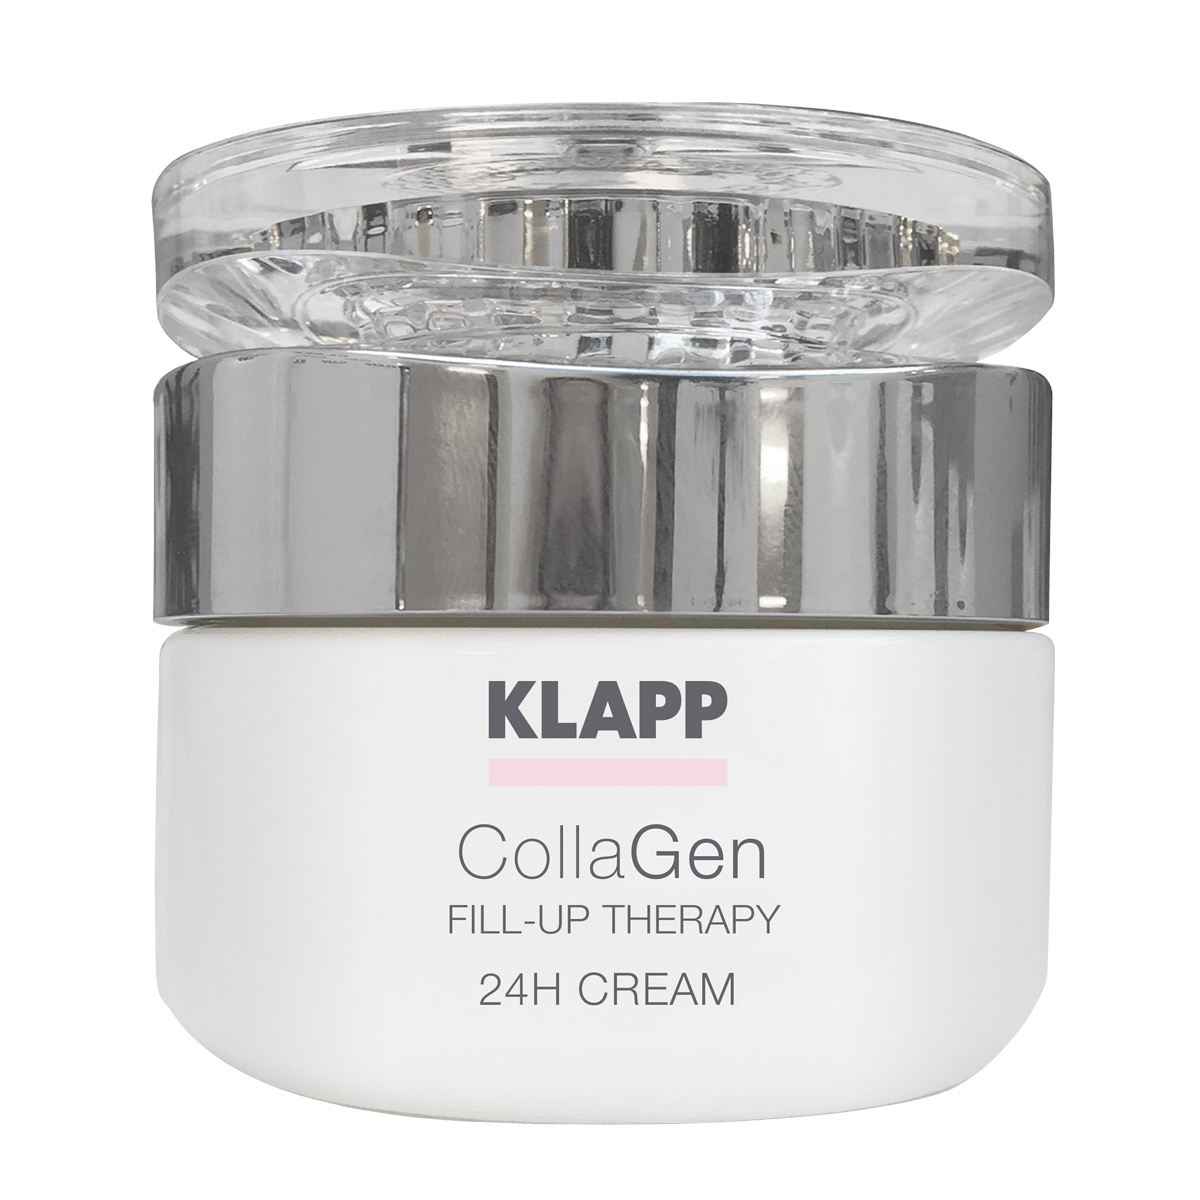 KLAPP Collagen 24H Cream 50 ml Fill-Up Therapy